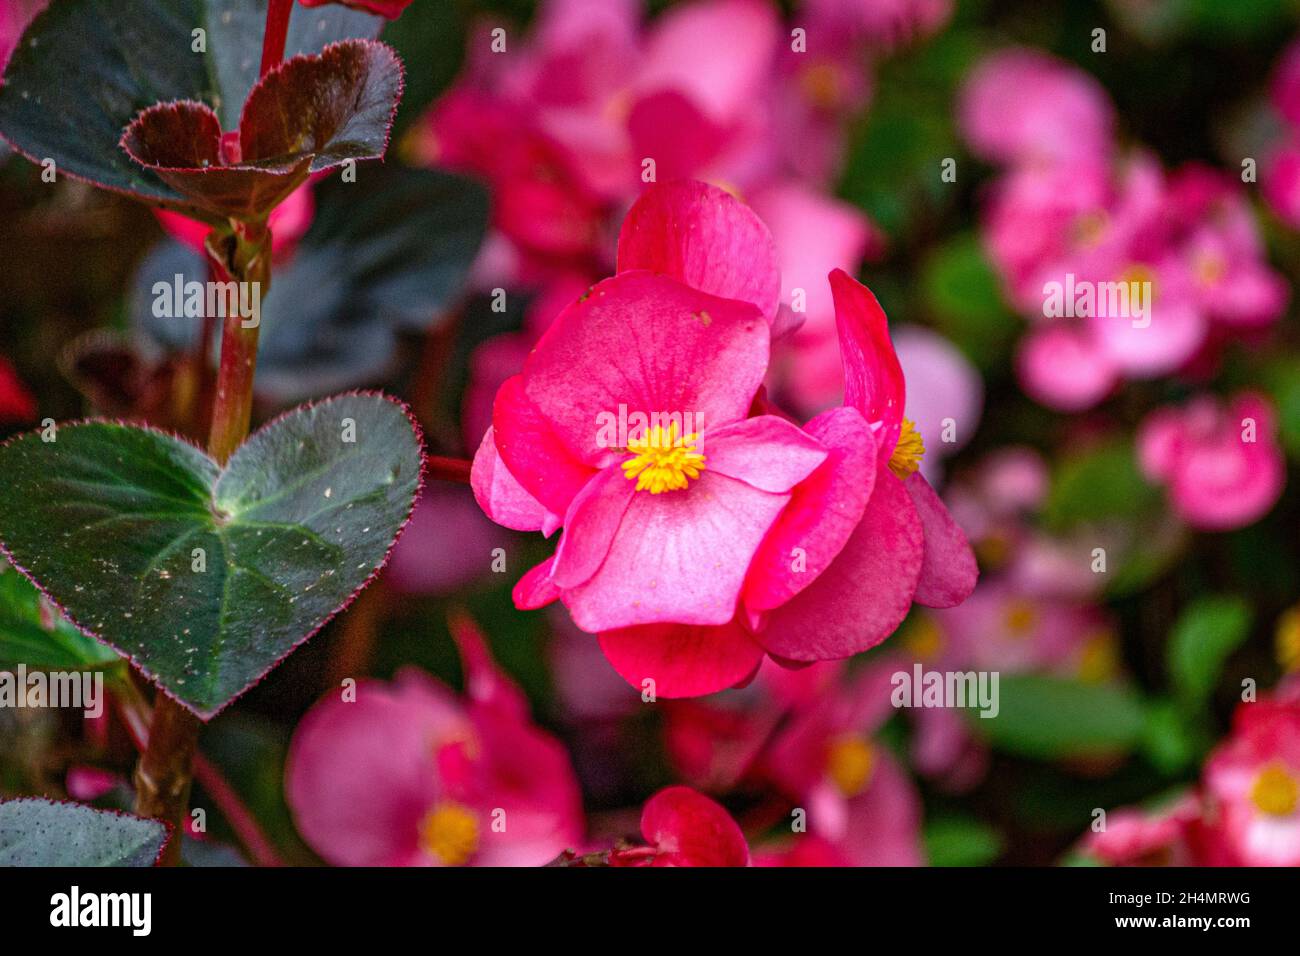 A flower bed of bright pink begonia flowers in the garden. Stock Photo